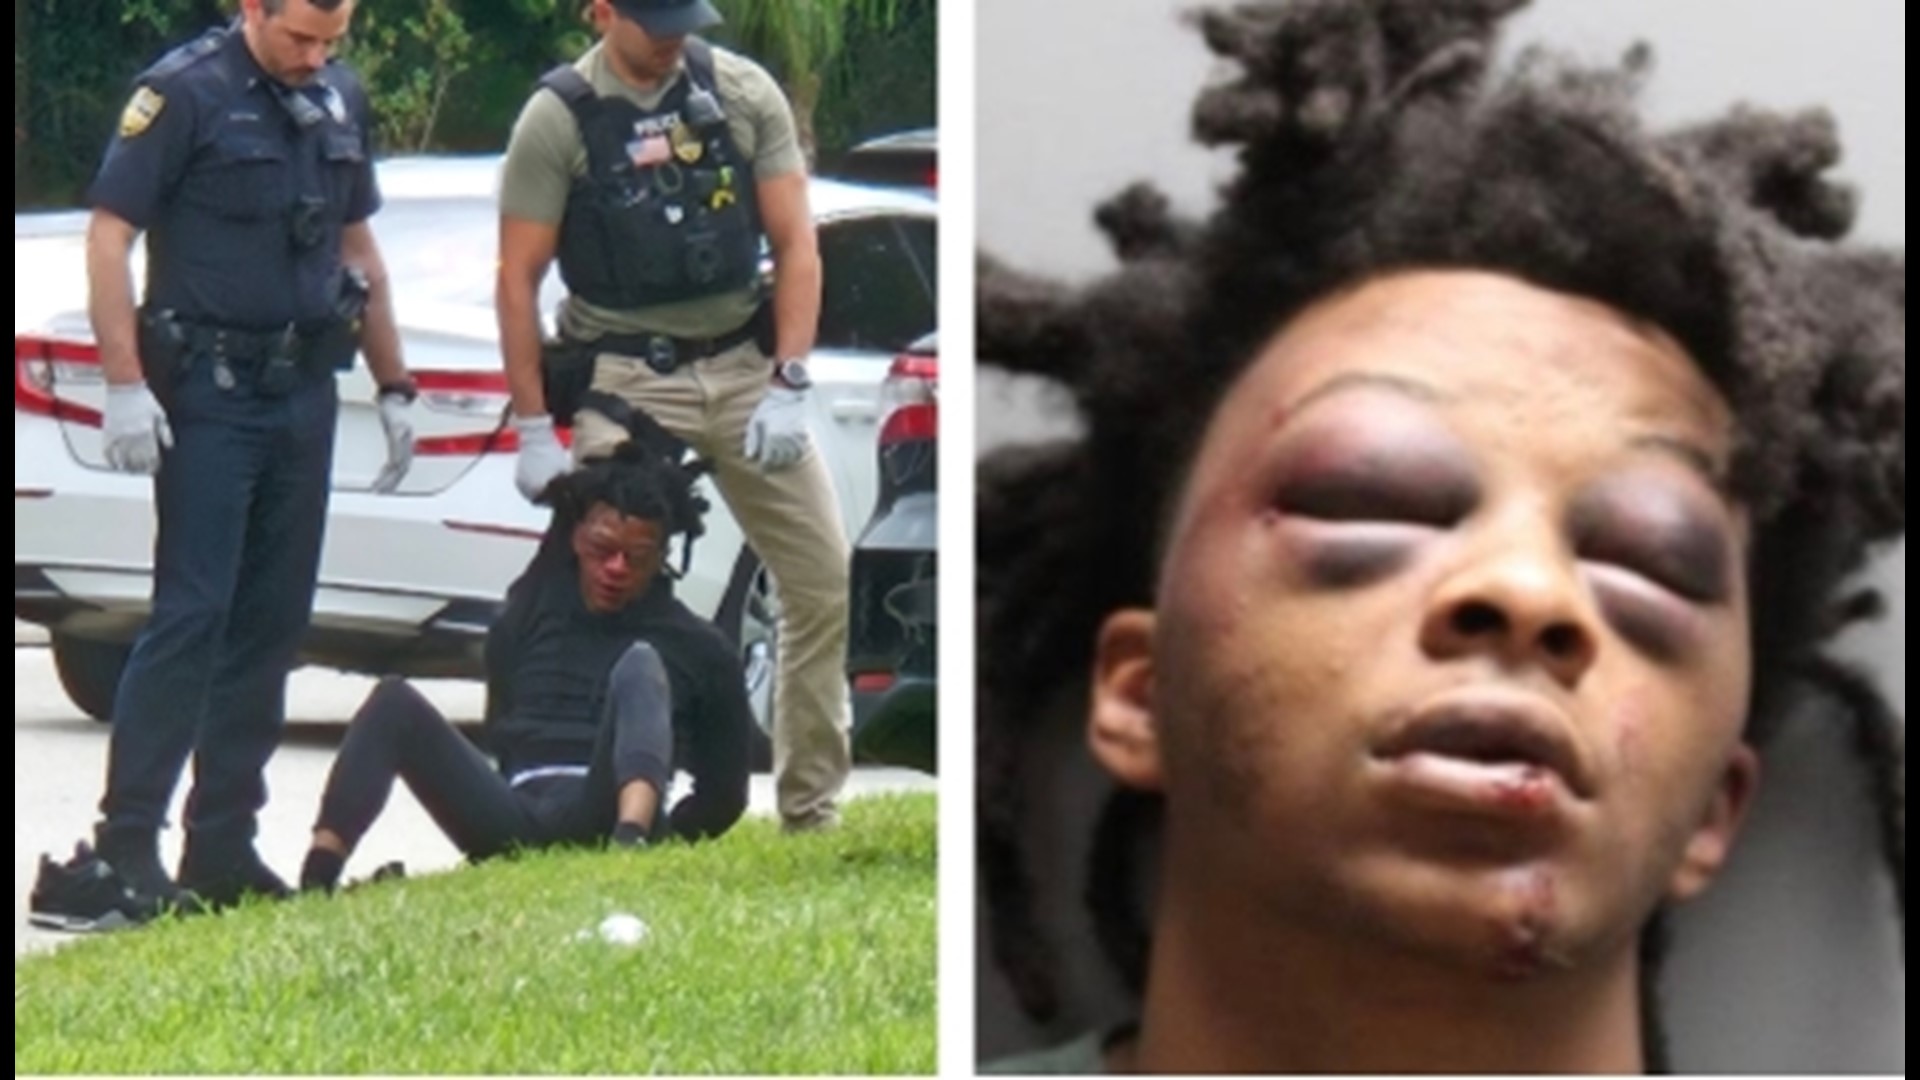 After some misconception, the Department of Justice clarifies in a letter that JSO isn't being investigated but, is investigating the Le'Keian Woods incident.